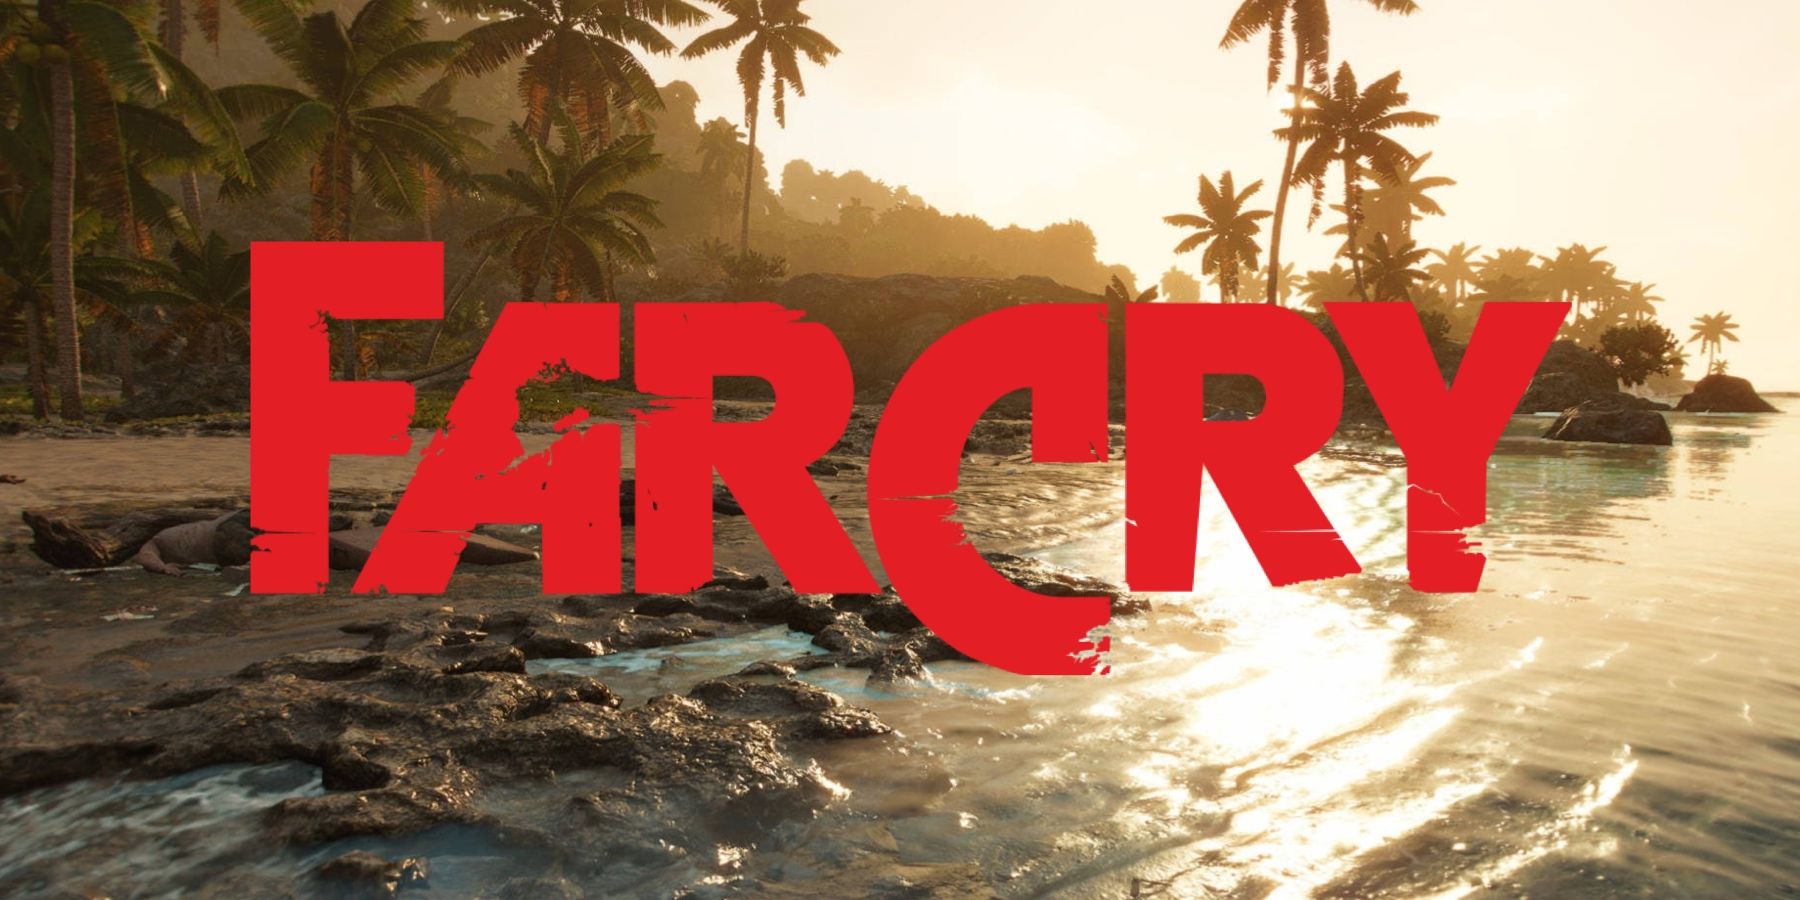 far-cry-7-logo-in-red-beach-shore-background